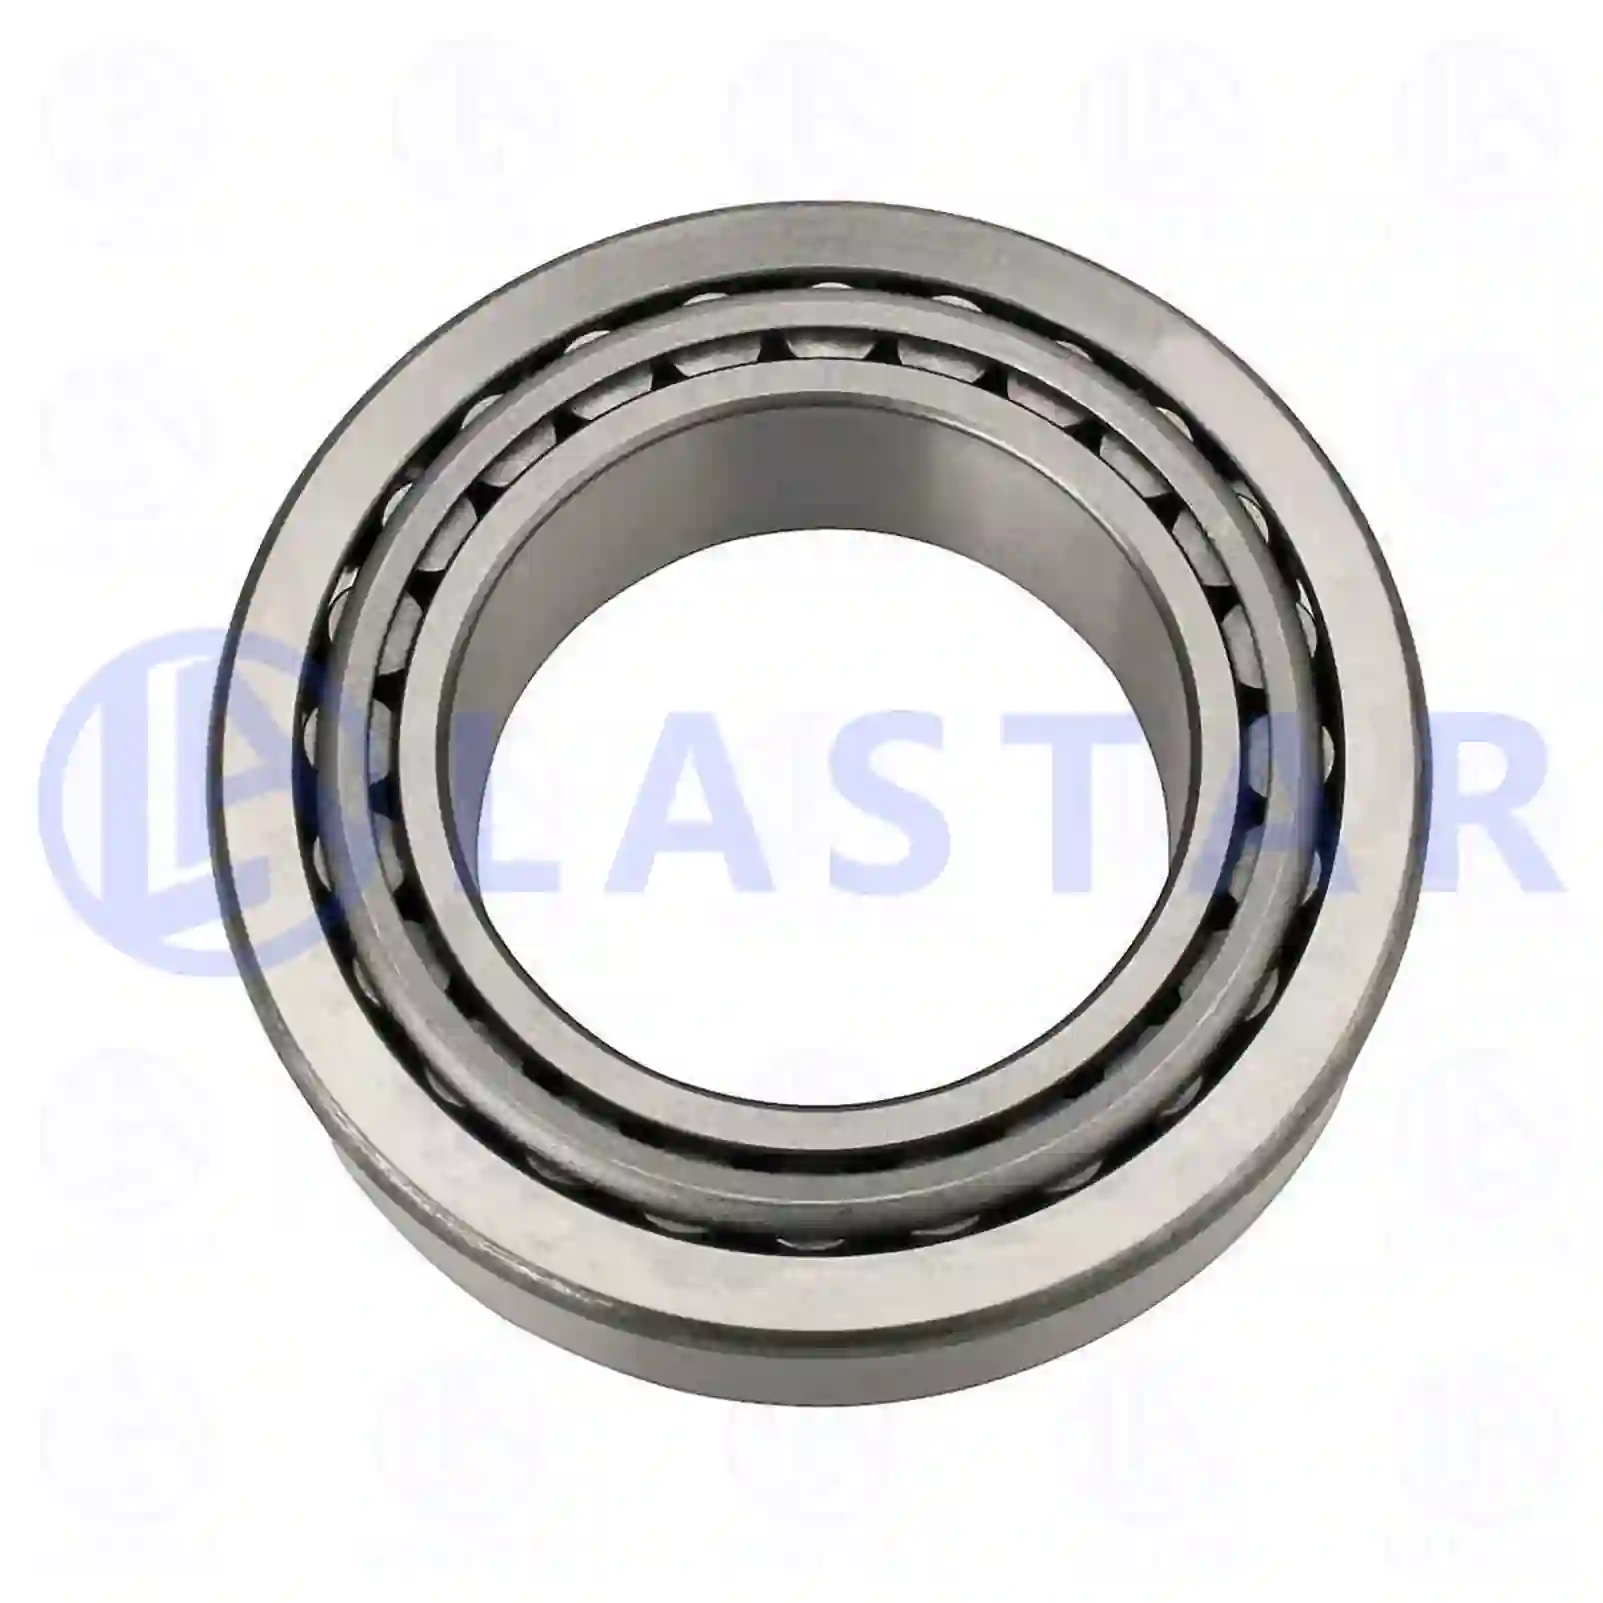 Rear Axle, Complete Tapered roller bearing, la no: 77730353 ,  oem no:0221664, 221664, 5000788406, 06324990040, 06324990131, 06324990189, 81934200270, 0009814218, 0039813005, 0039813205, 0089810305, 43210-D930A, 0023433115, 5000788406, 184678, ZG03011-0008 Lastar Spare Part | Truck Spare Parts, Auotomotive Spare Parts